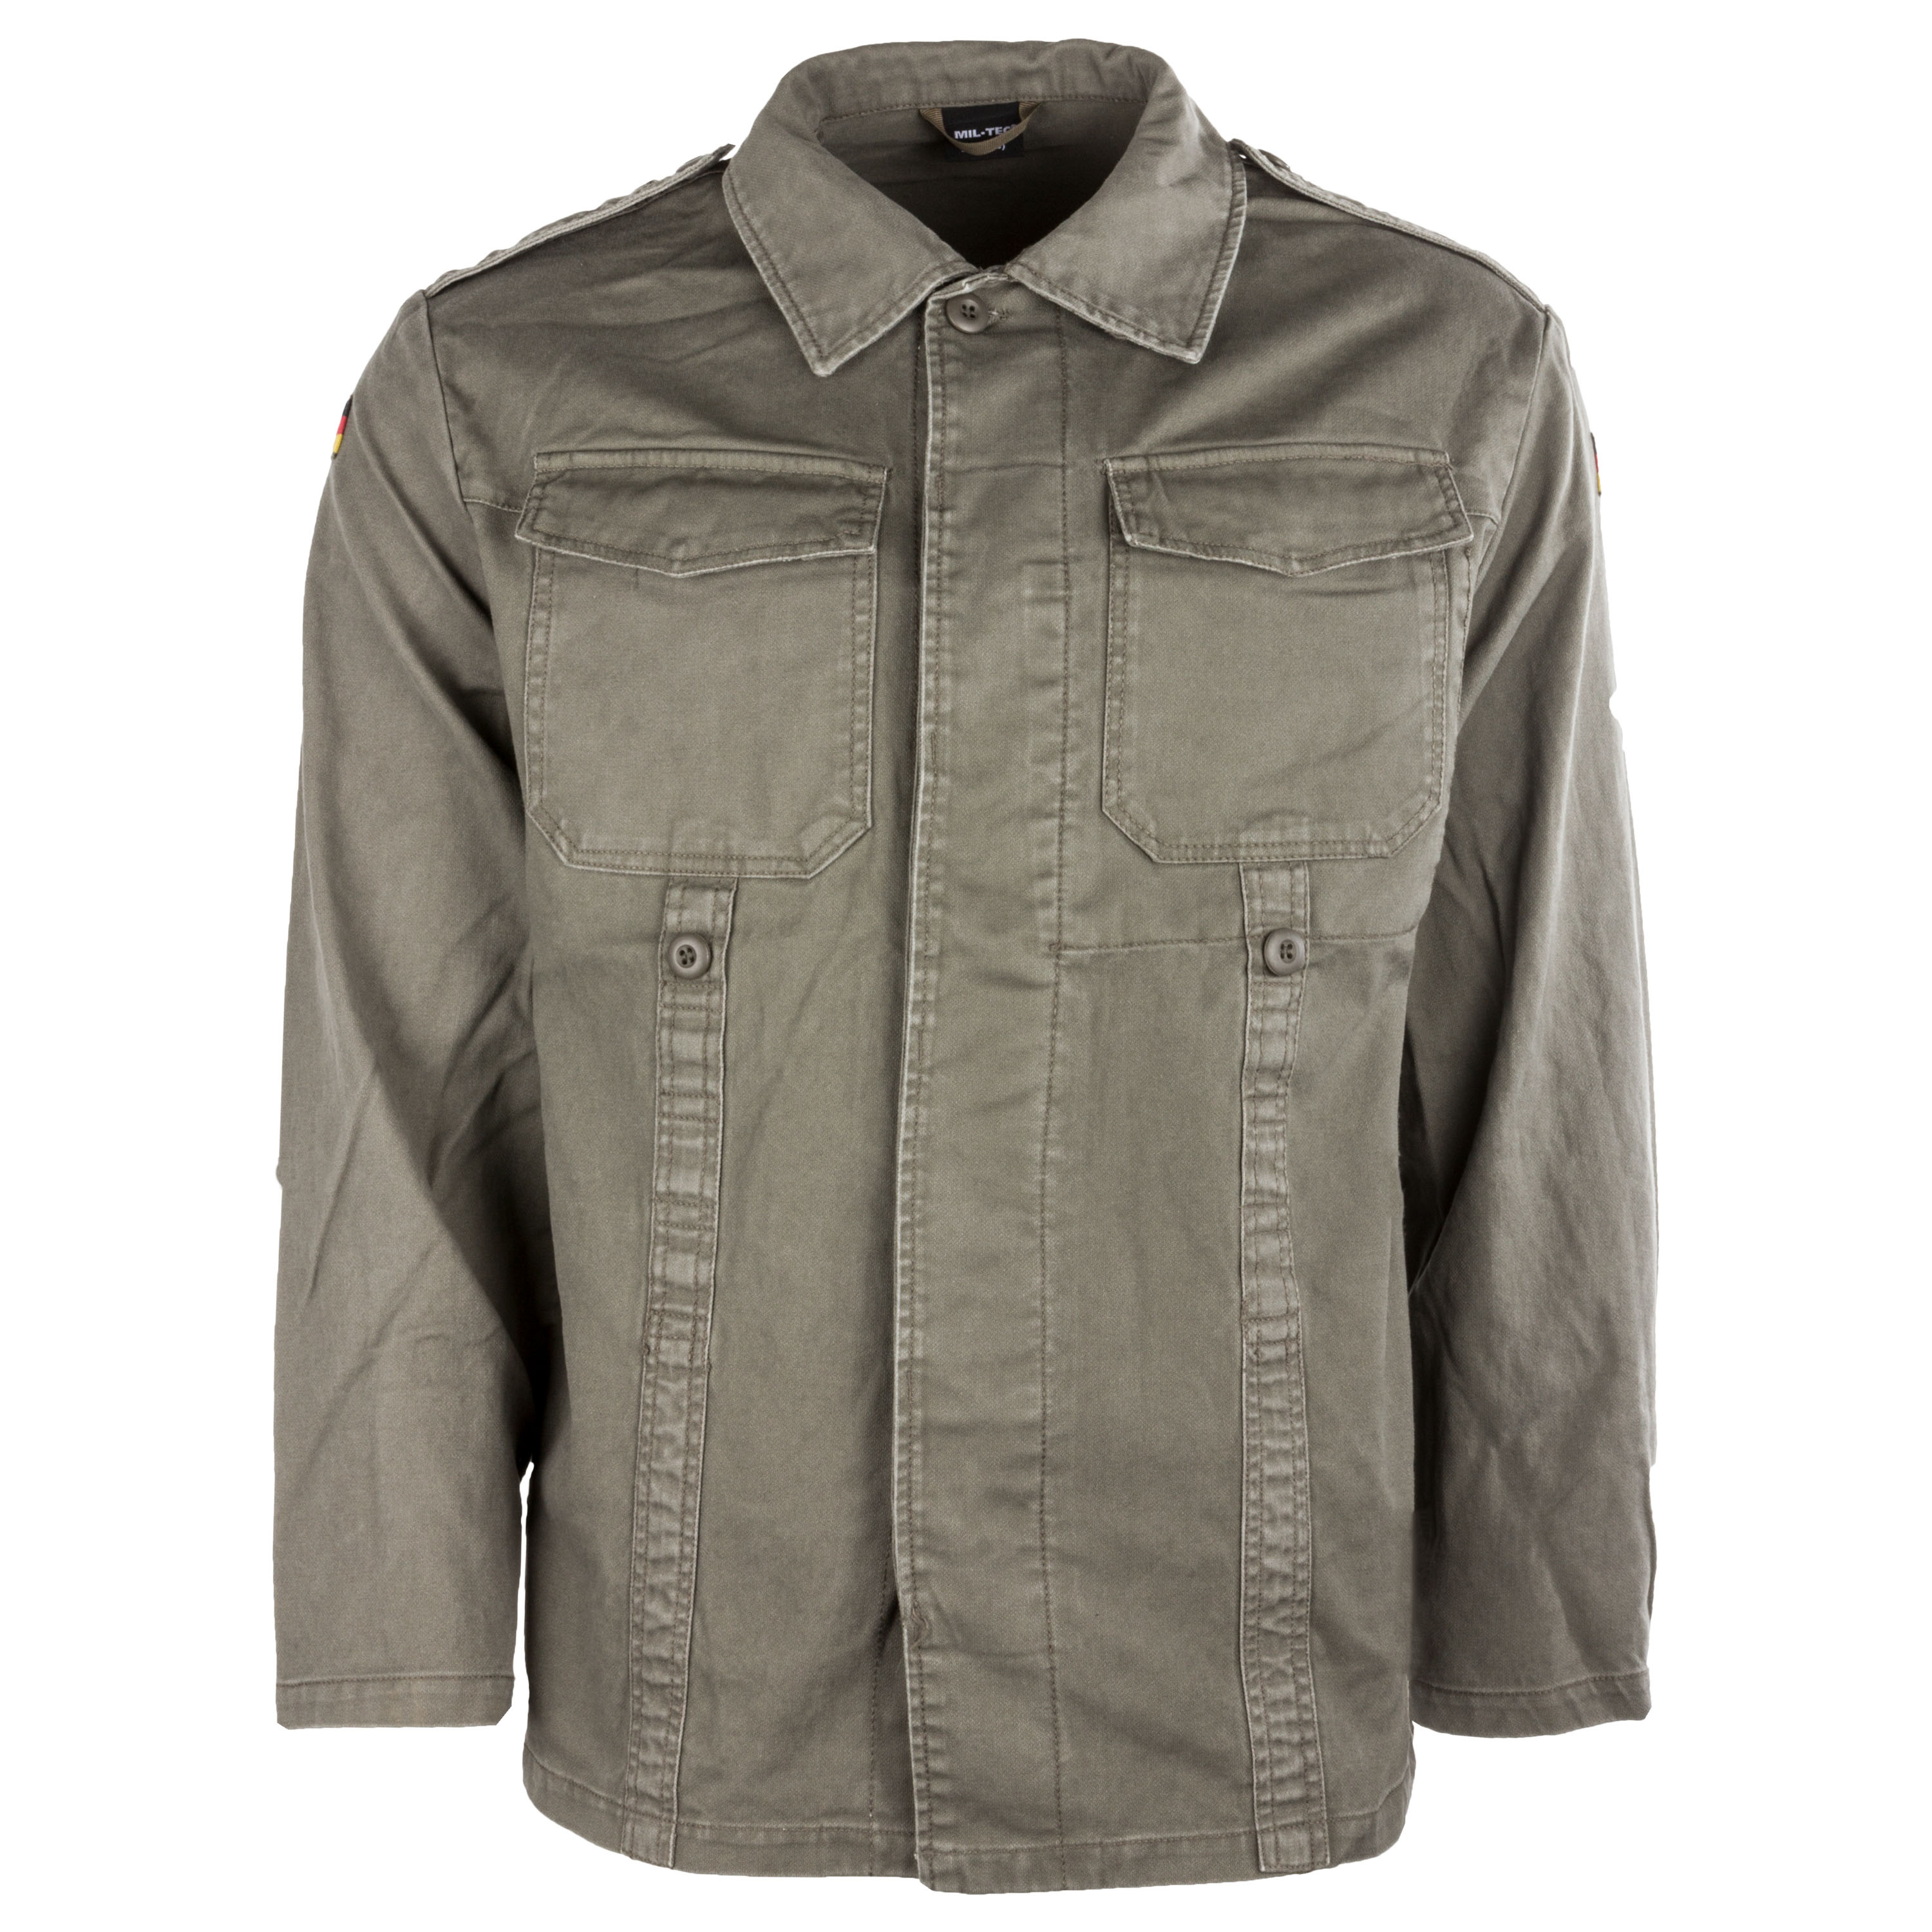 Purchase the Moleskin Jacket BW Old Style olive by ASMC